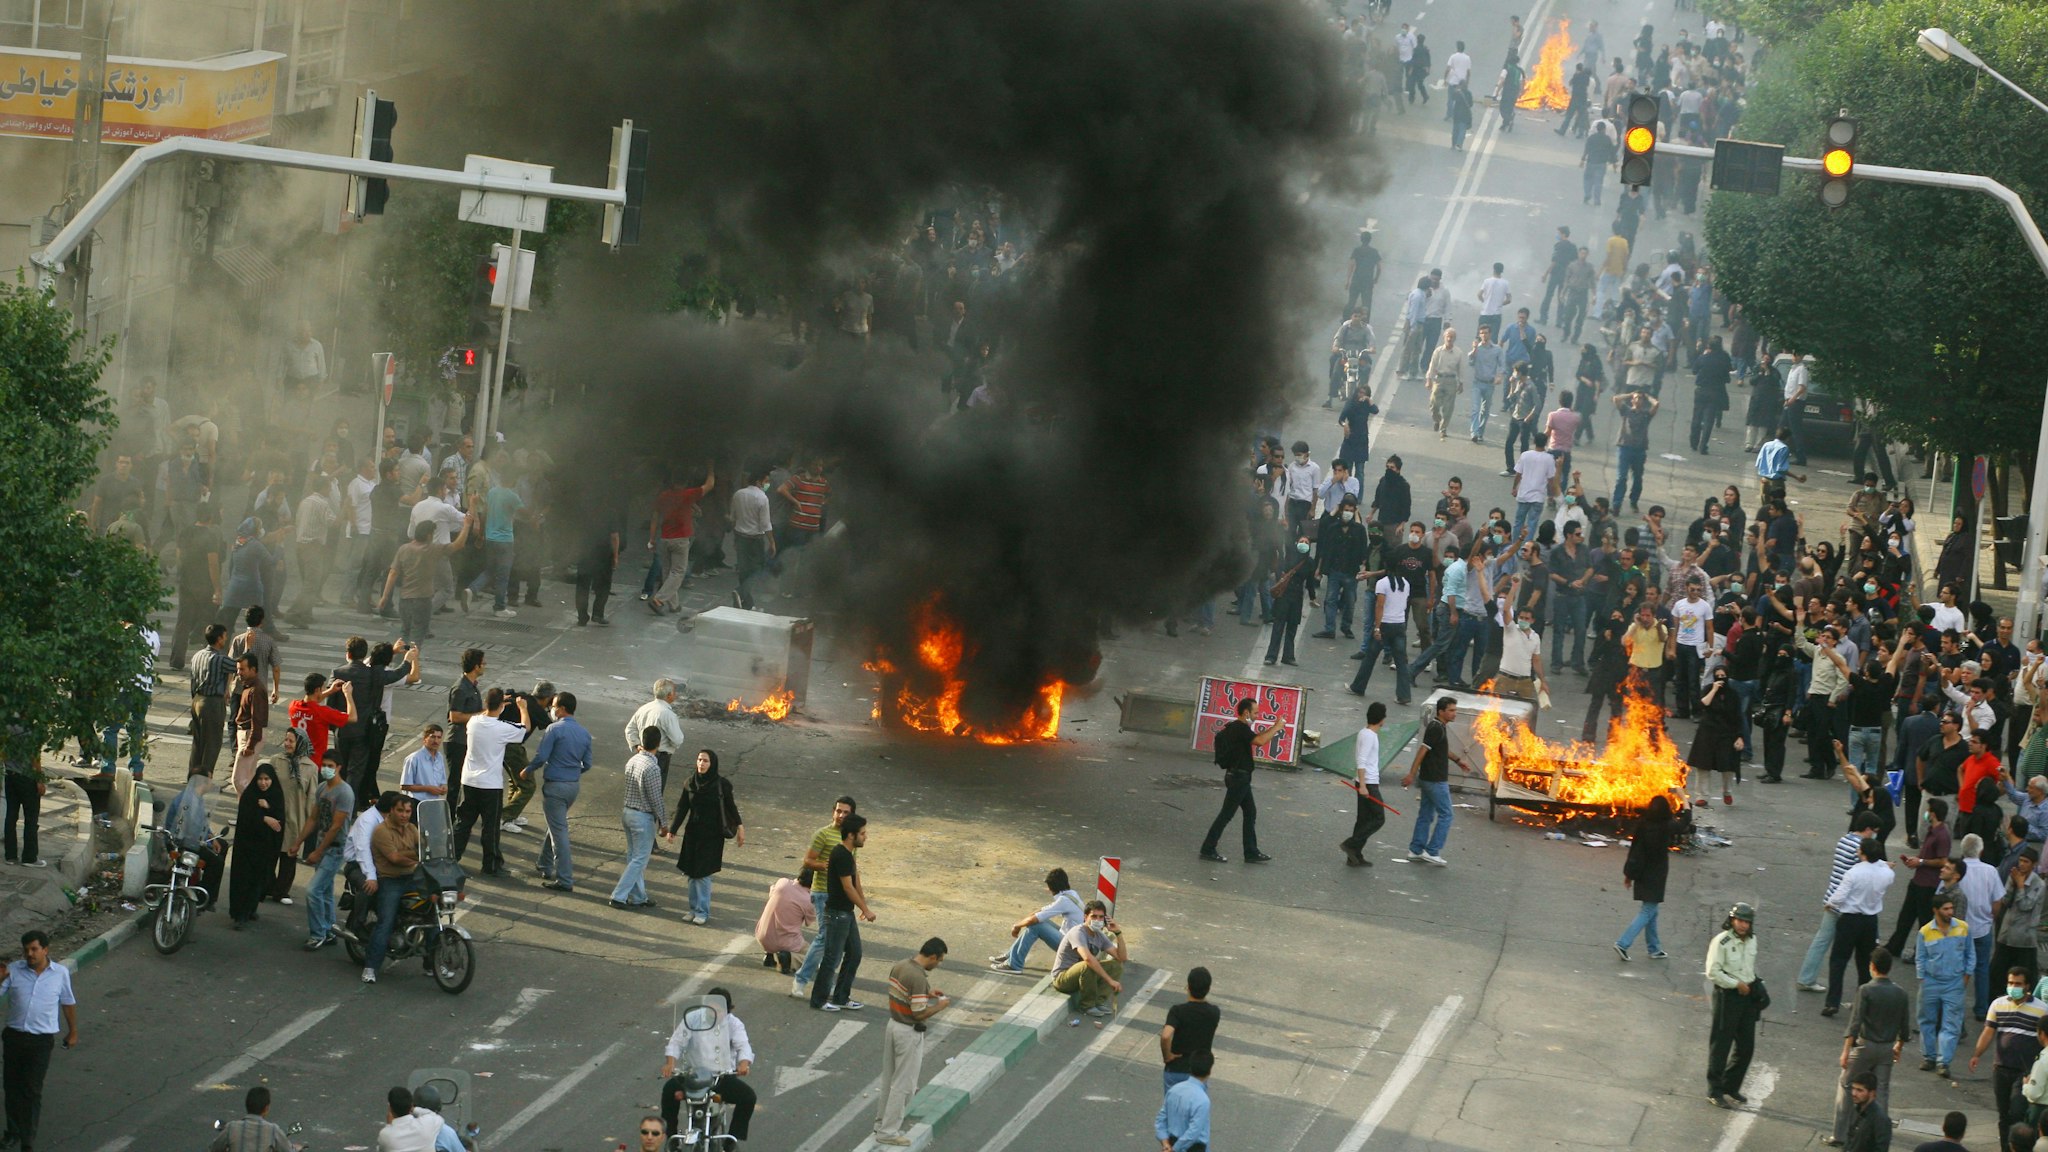 Supporters of Iran's defeated presidential candidate Mir Hossein Mousavi set burning barricades in the streets as they protest during a demonstration on June 20, 2009 in Tehran, Iran. Thousands of Iranians clashed with police as they defied an ultimatum from supreme leader Ayatollah Ali Khamenei calling for an end to protests over last week's disputed presidential election results. Iranian police have tried to break up protest using water cannon, tear gas, batons and live rounds.